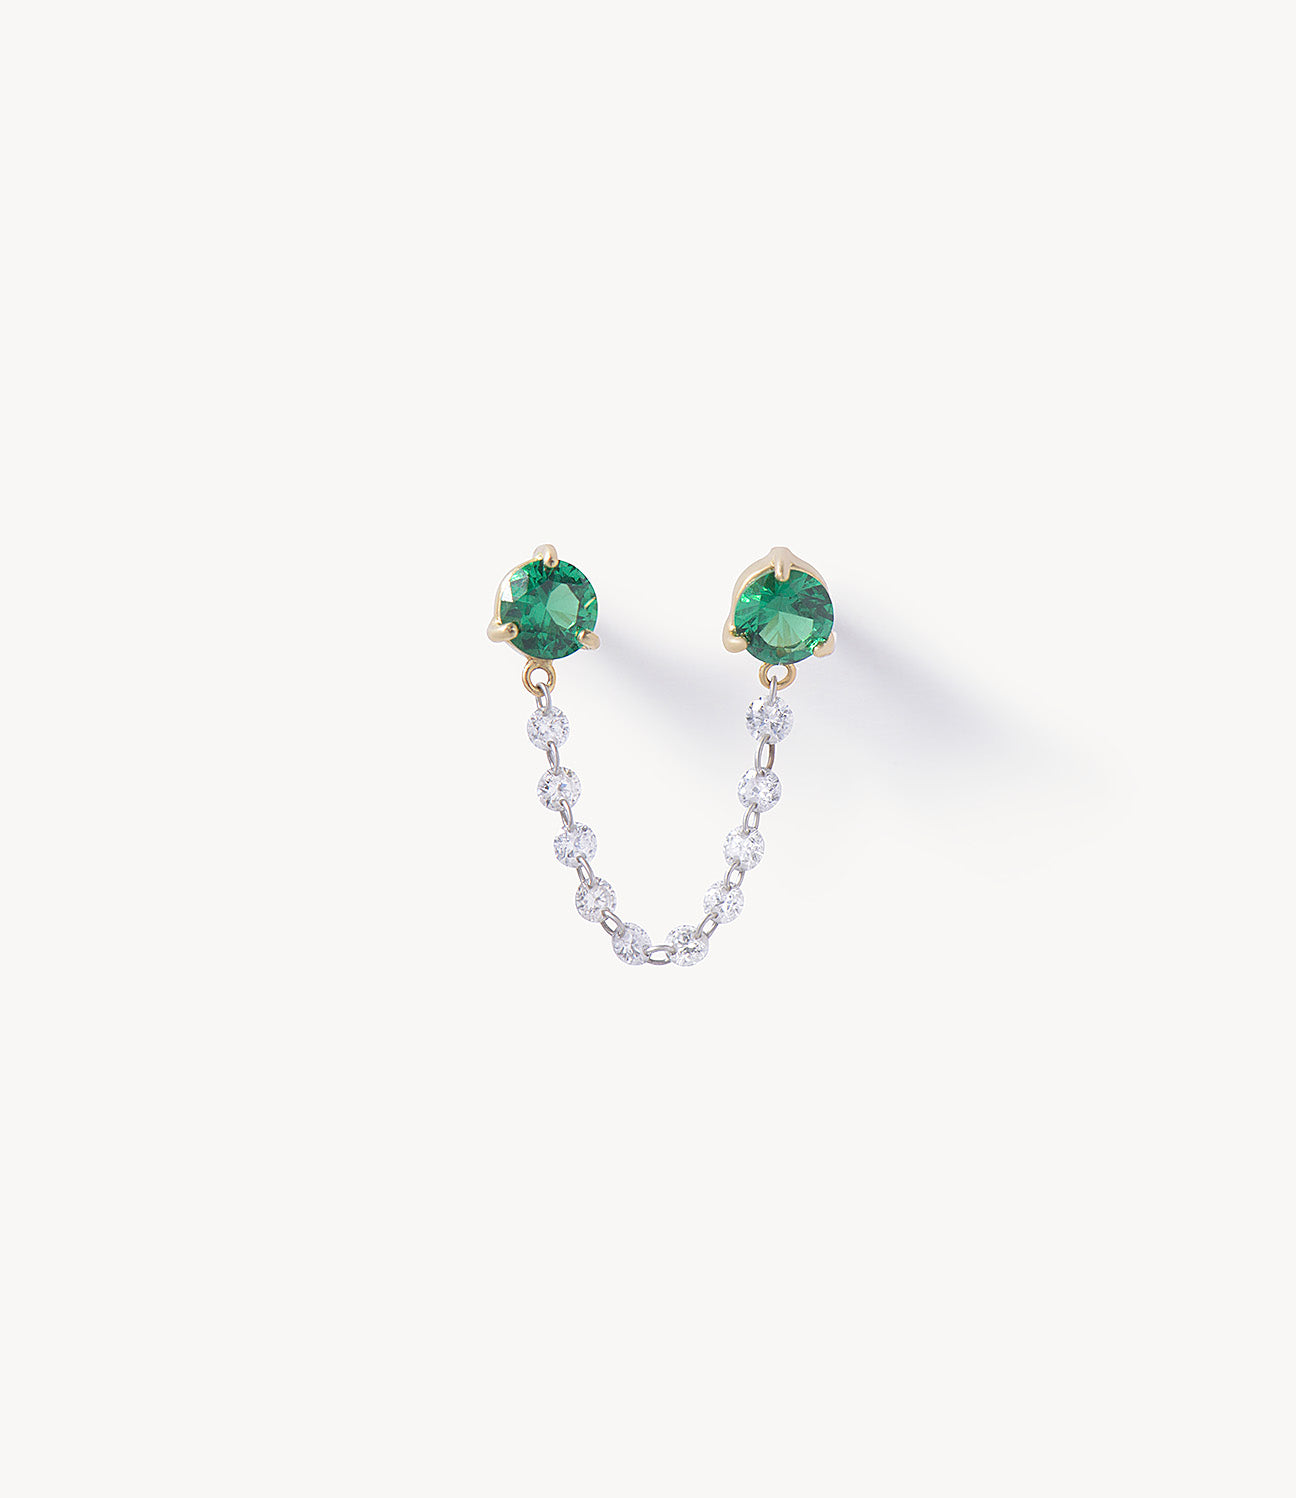 Double Emerald Stud Earrings with Drilled Diamond Chain